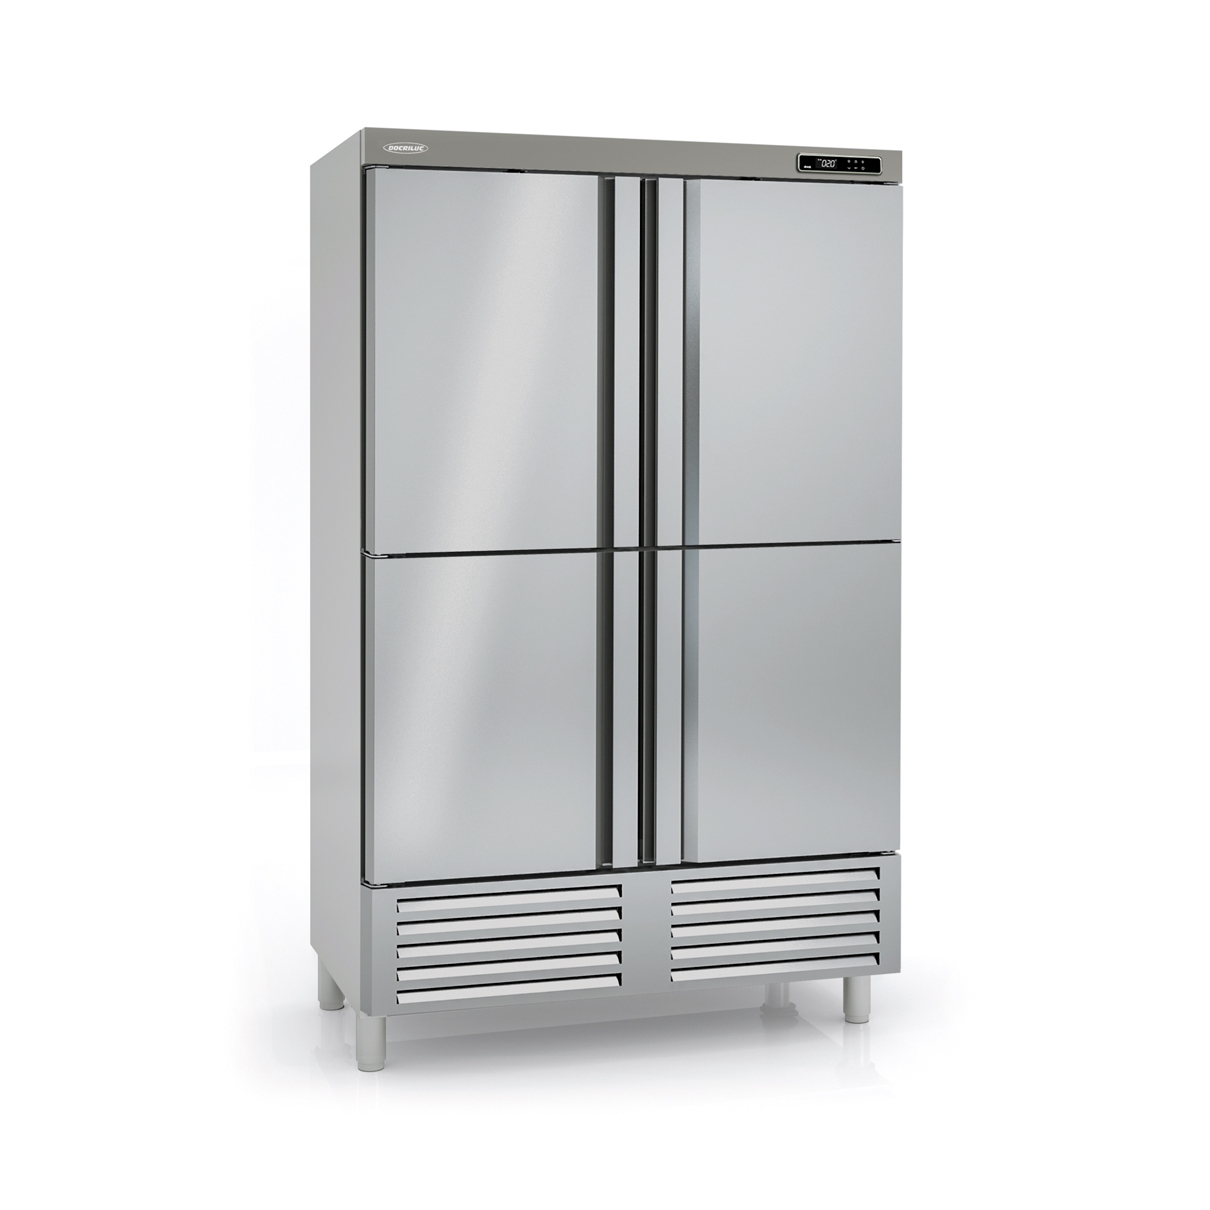 Snack Refrigerated Cabinet AR-125-4